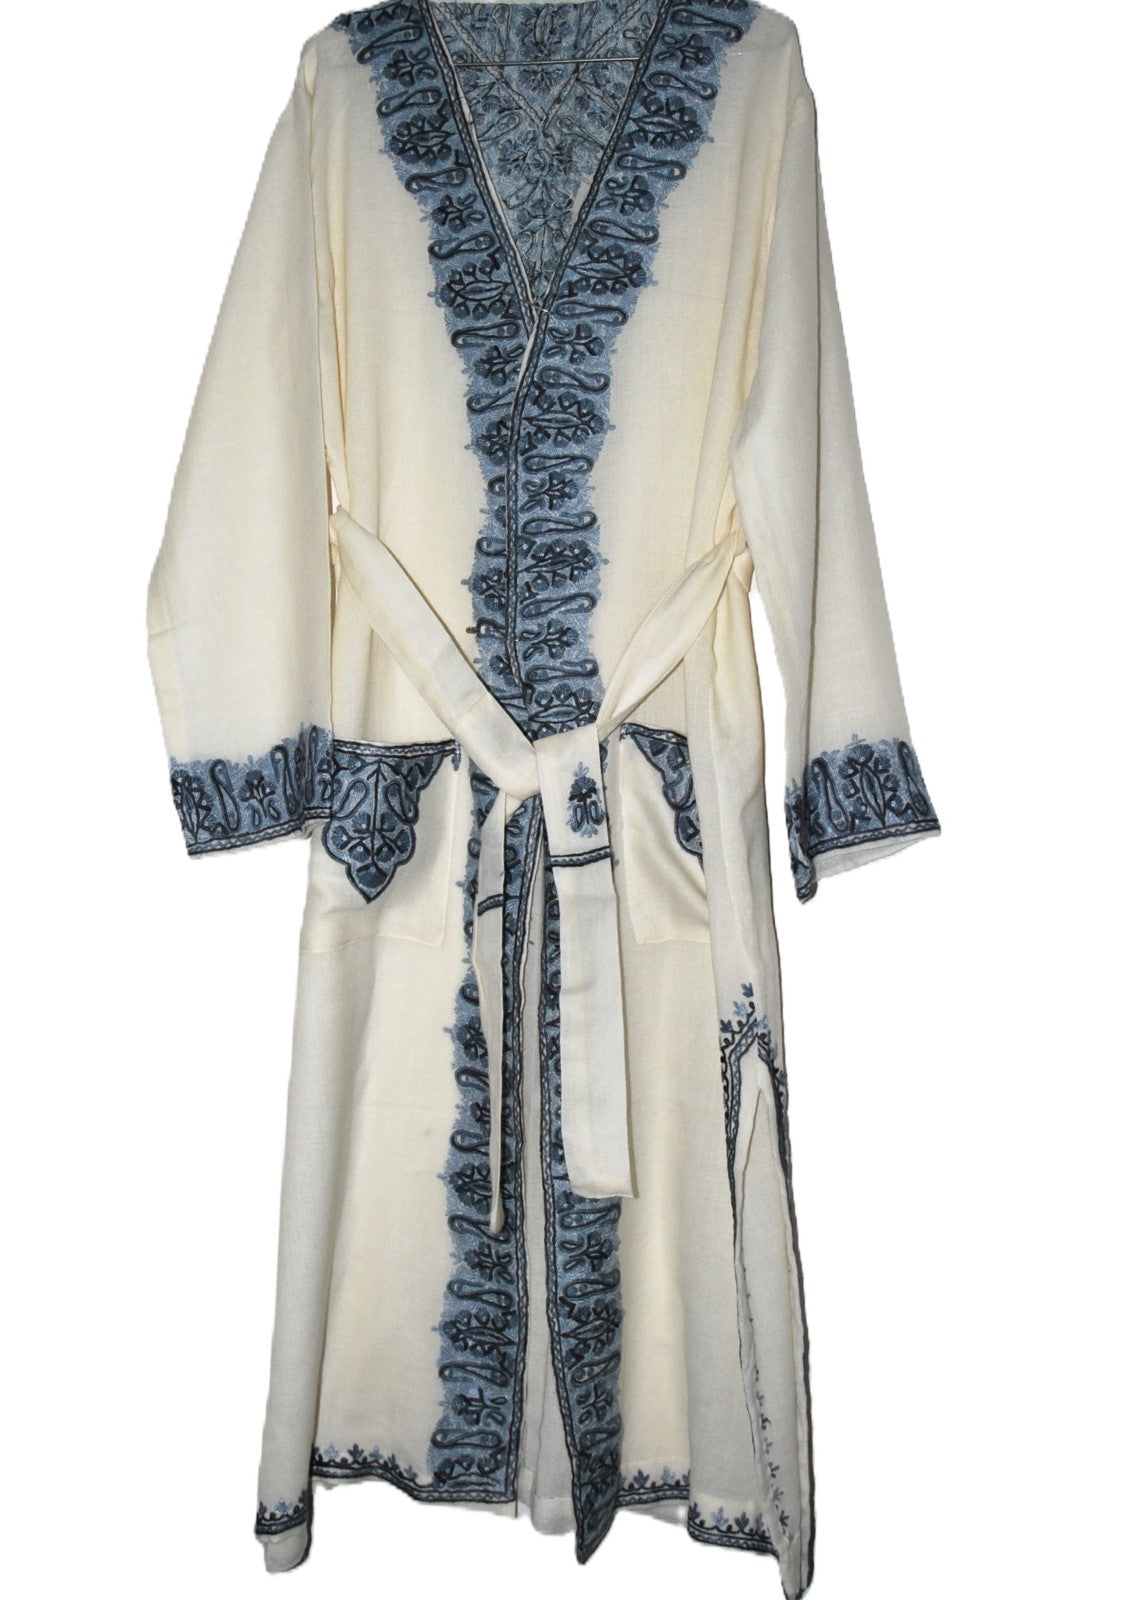 Embroidered Woolen Dressing Gown Ladies, Grey on White  #WG-021